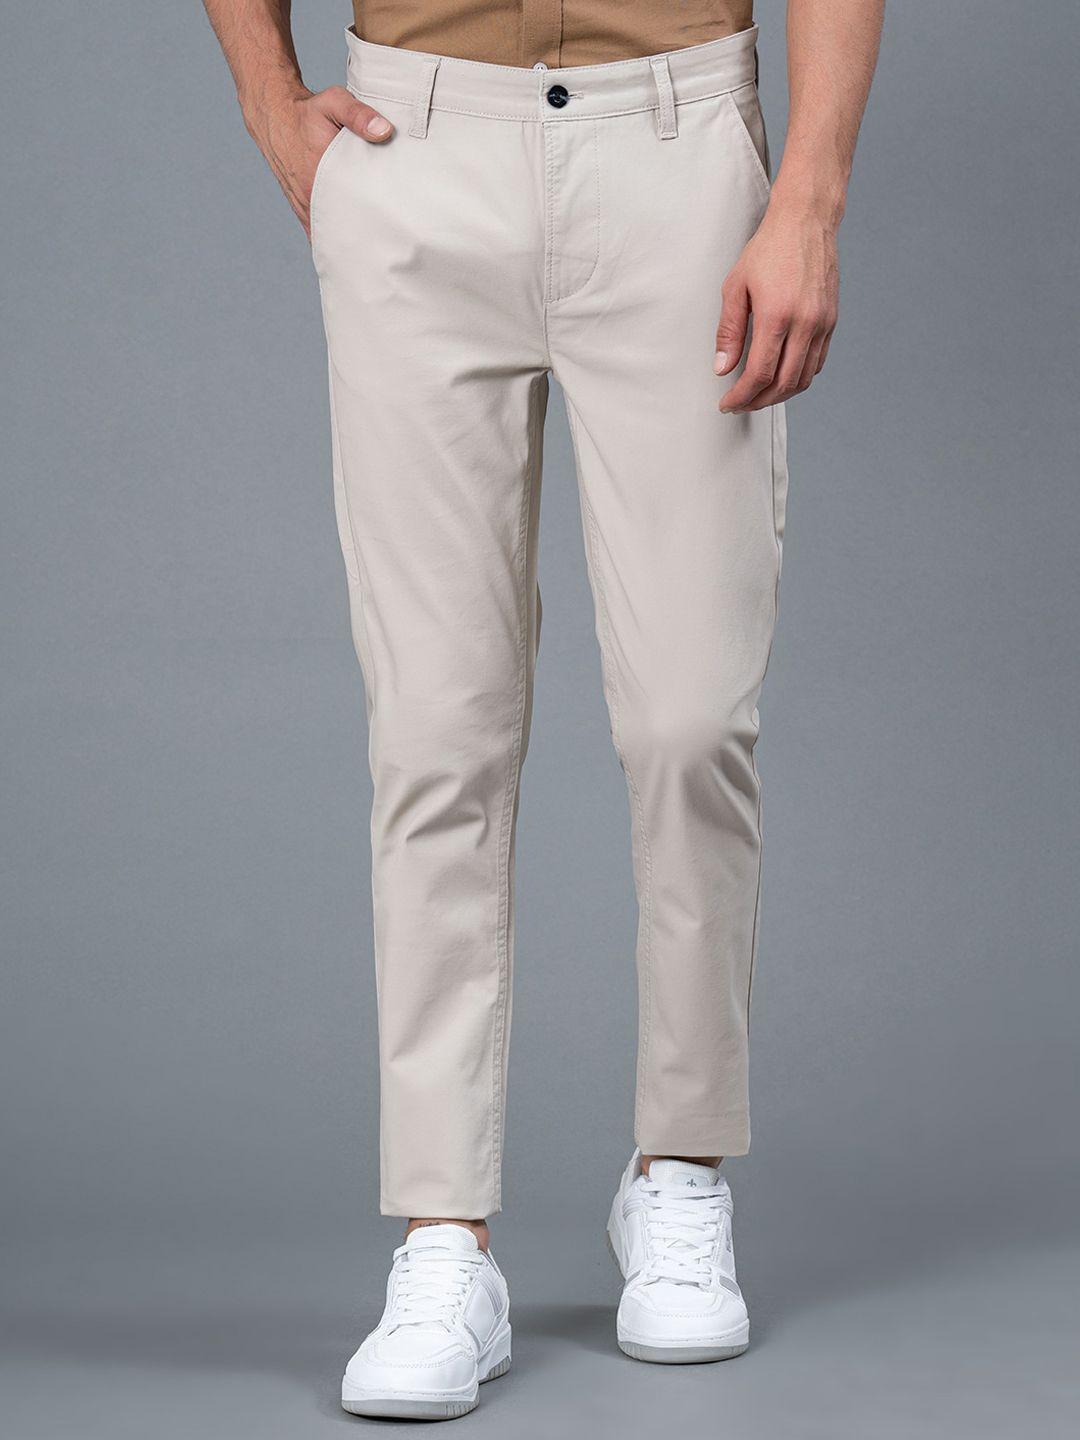 red tape men mid-rise skinny fit chinos trousers